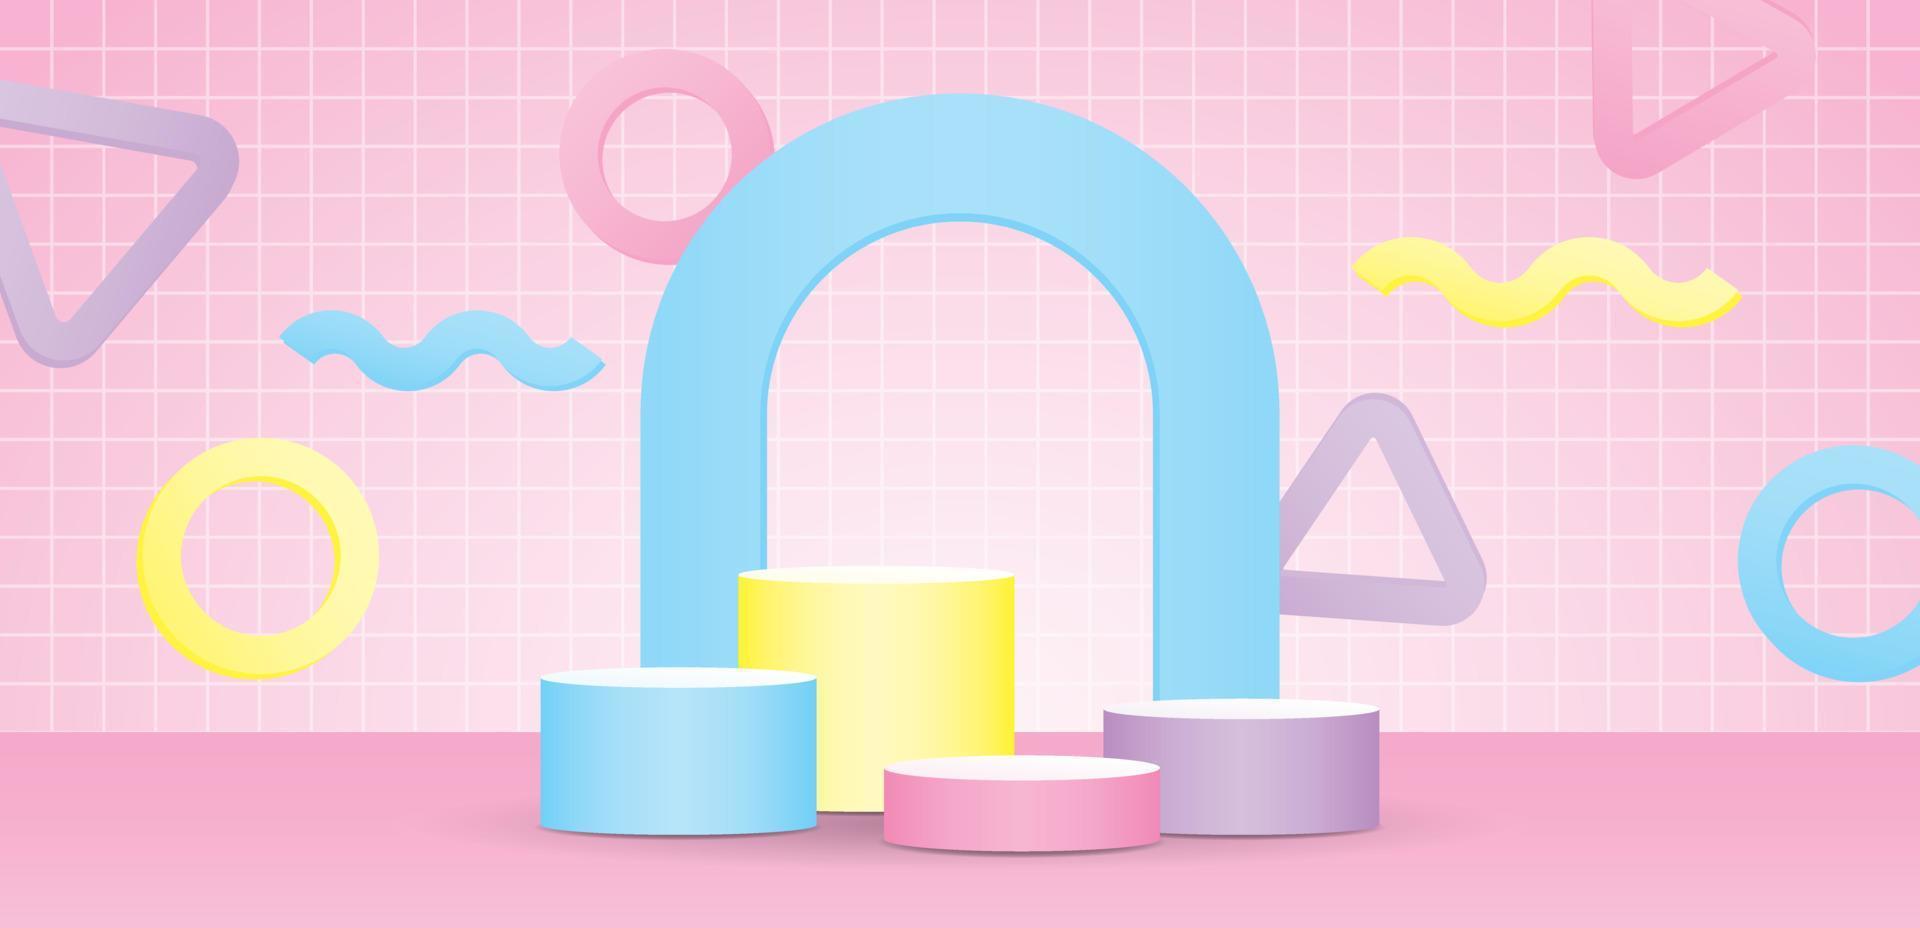 cute pastel colorful product podium set with arch and fun geometric element 3d illustration vector on grid pattern wall and sweet pink floor background